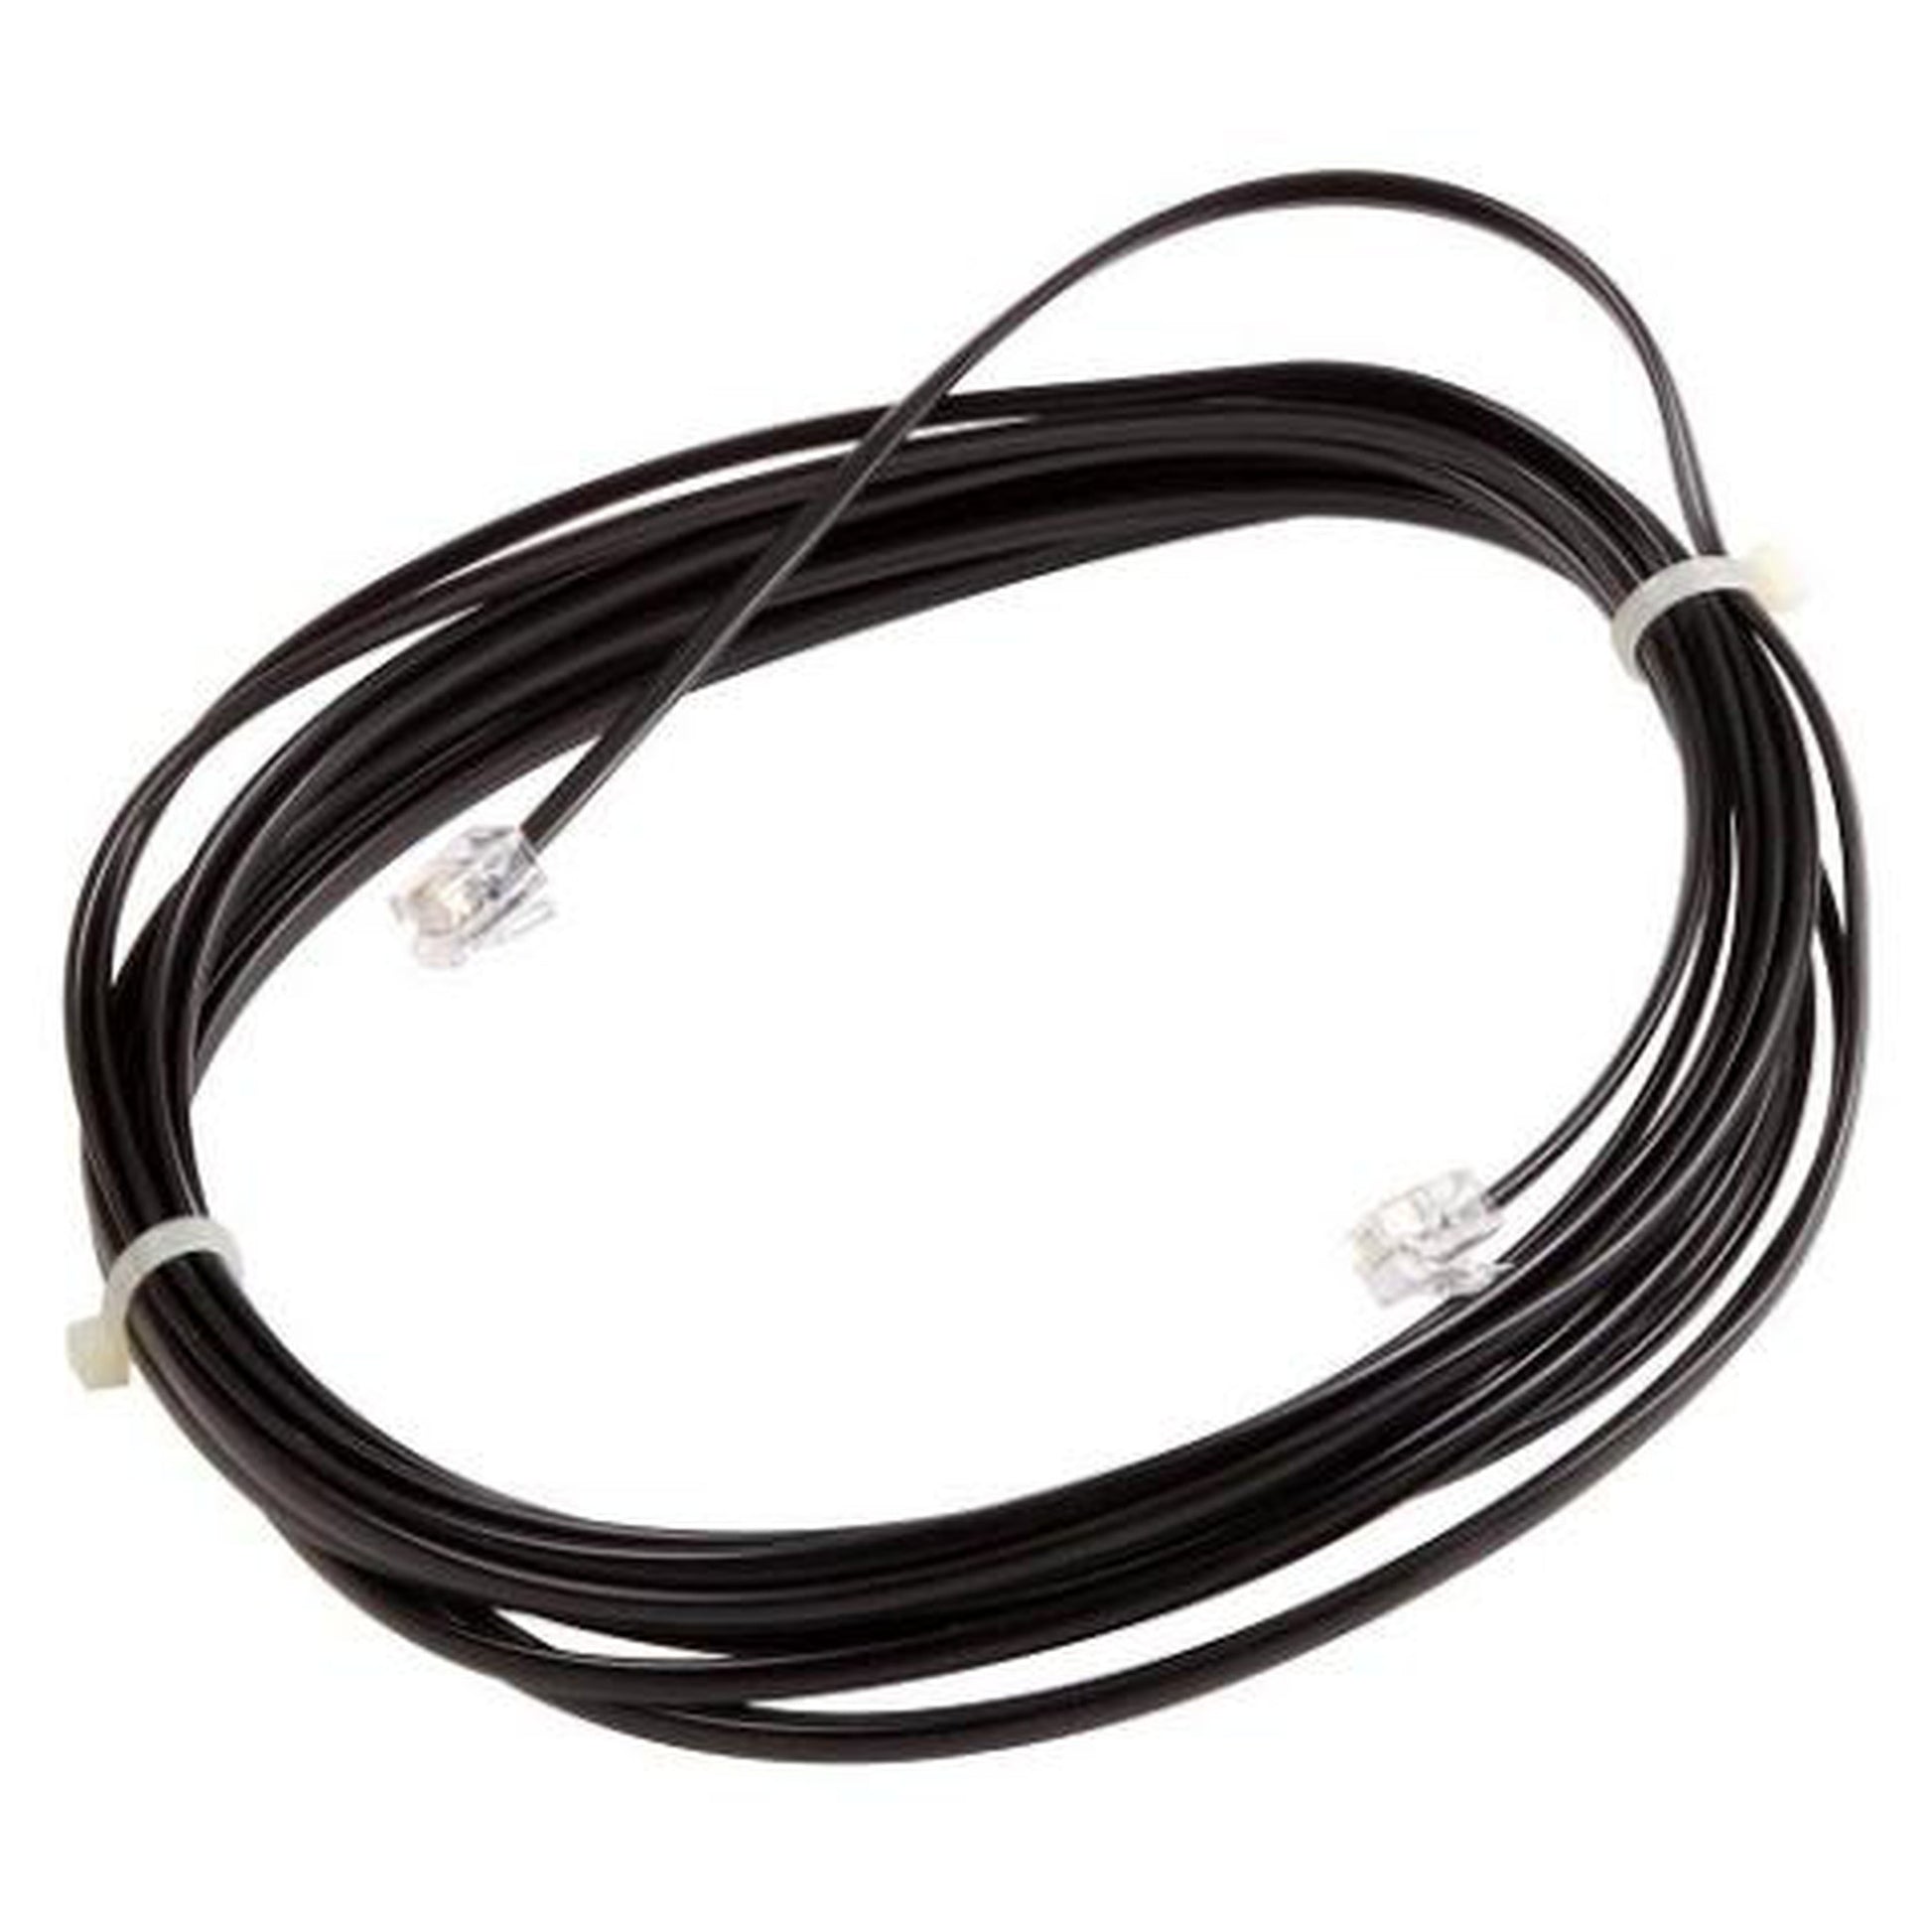 Harvia WX319 Black 20M Data Cable